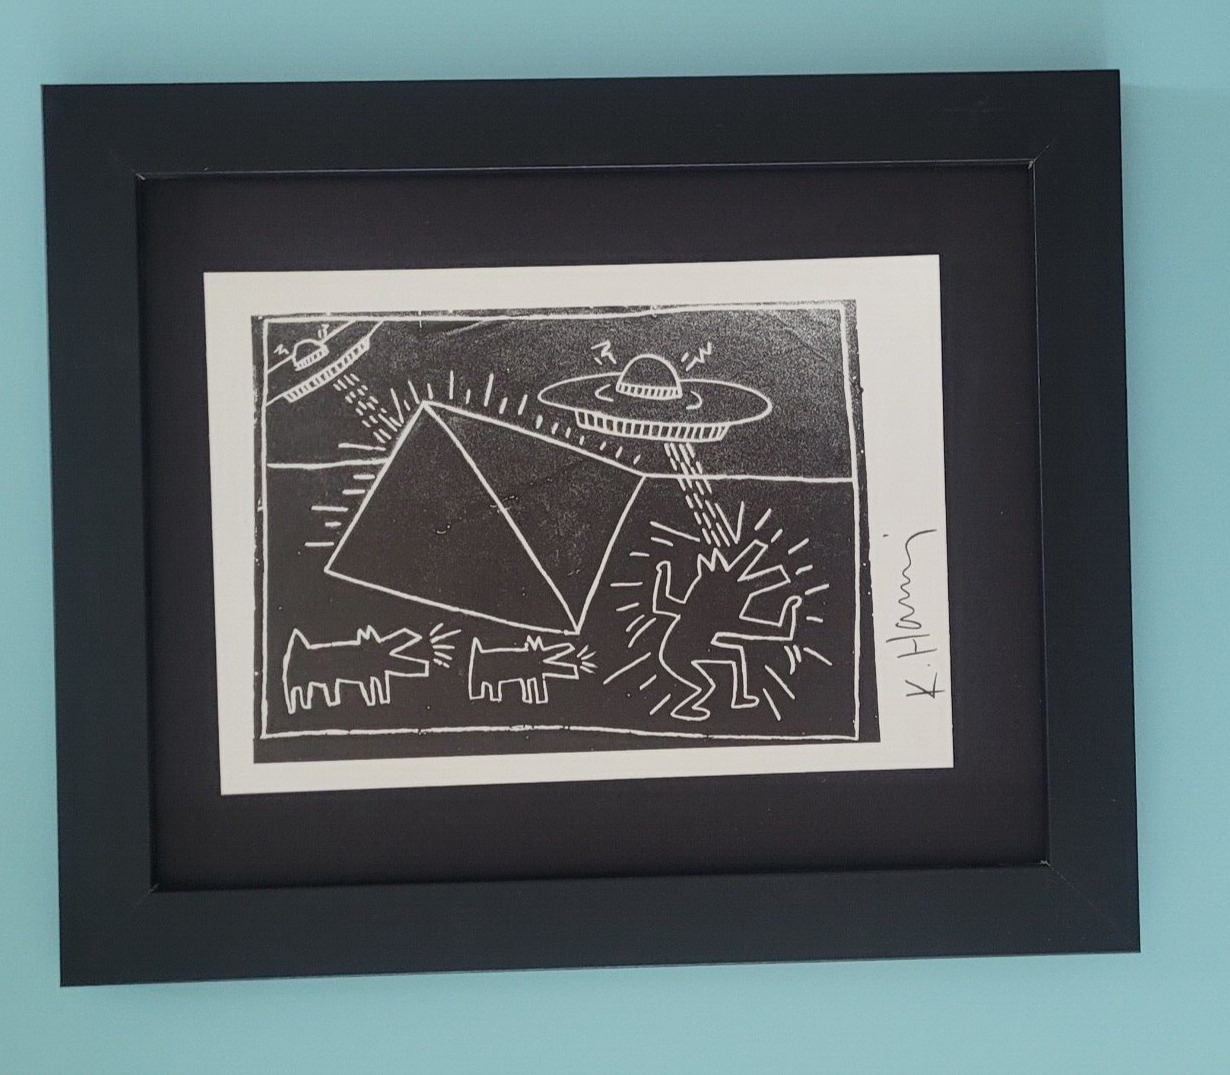 KEITH HARING + SIGNED VINTAGE 1989 PRINT FRAMED + BUY IT NOW